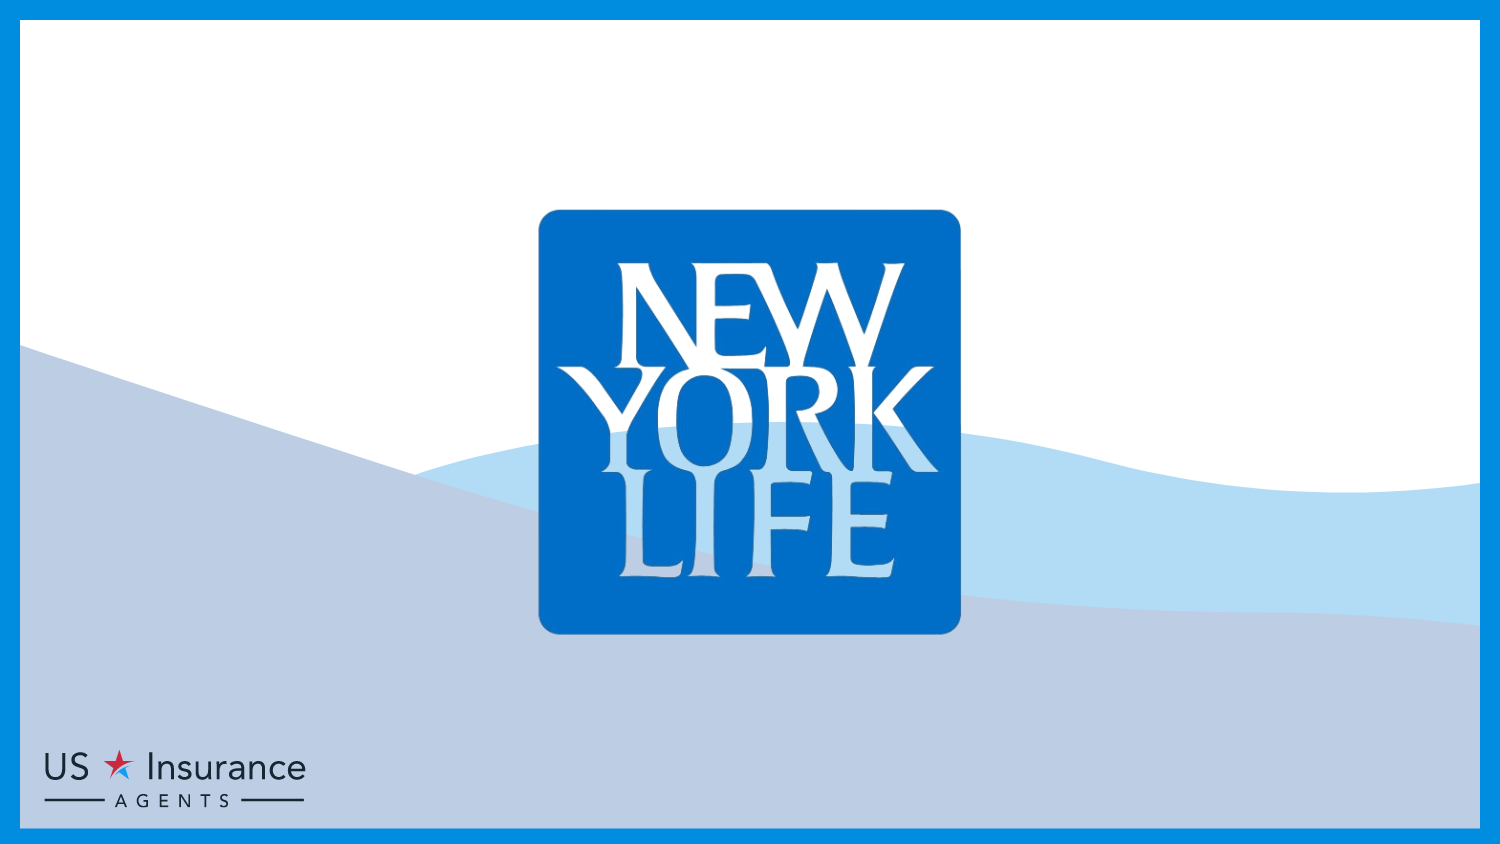 New York Life: Best Life Insurance for Kidney Transplant Patients